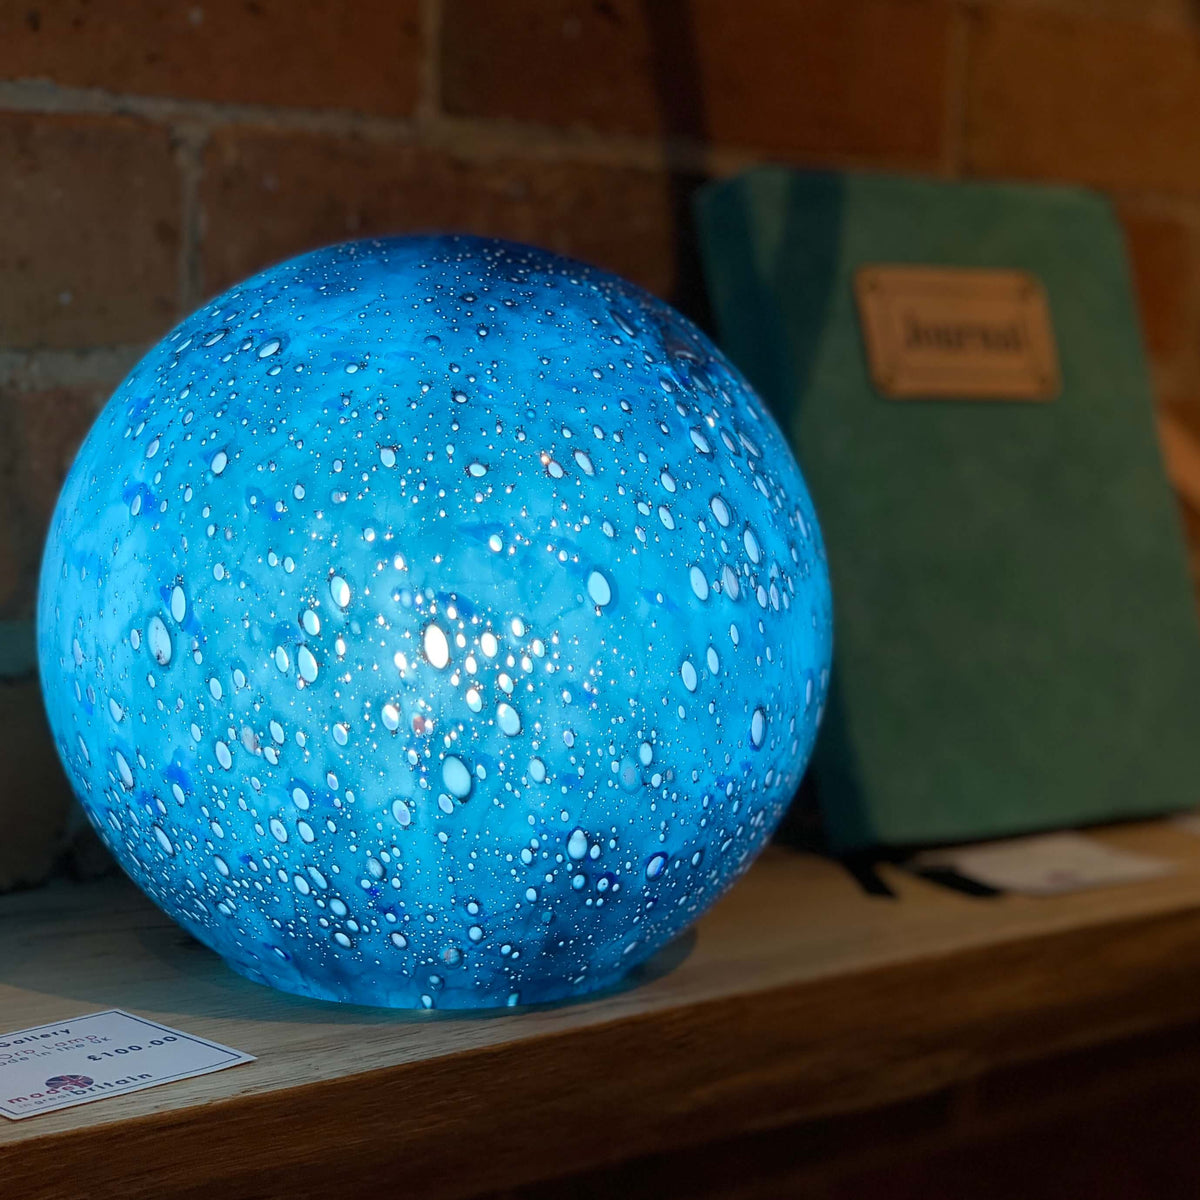 Blue blown glass orb lights, handmade with bubble pattern and a smooth surface. Available at Ferrers Gallery.